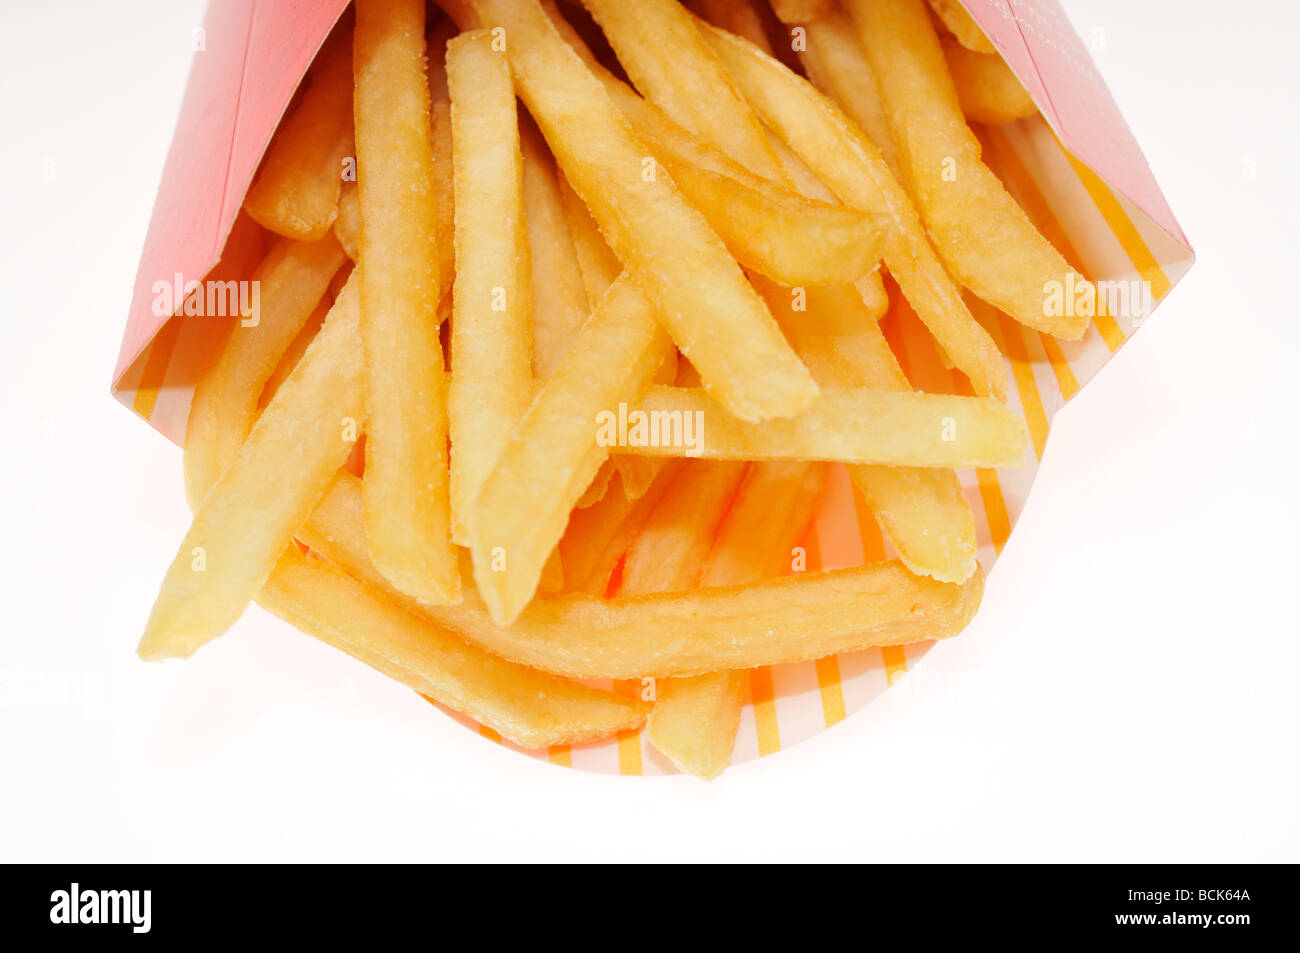 Container of Mcdonalds french fries on white background Stock Photo